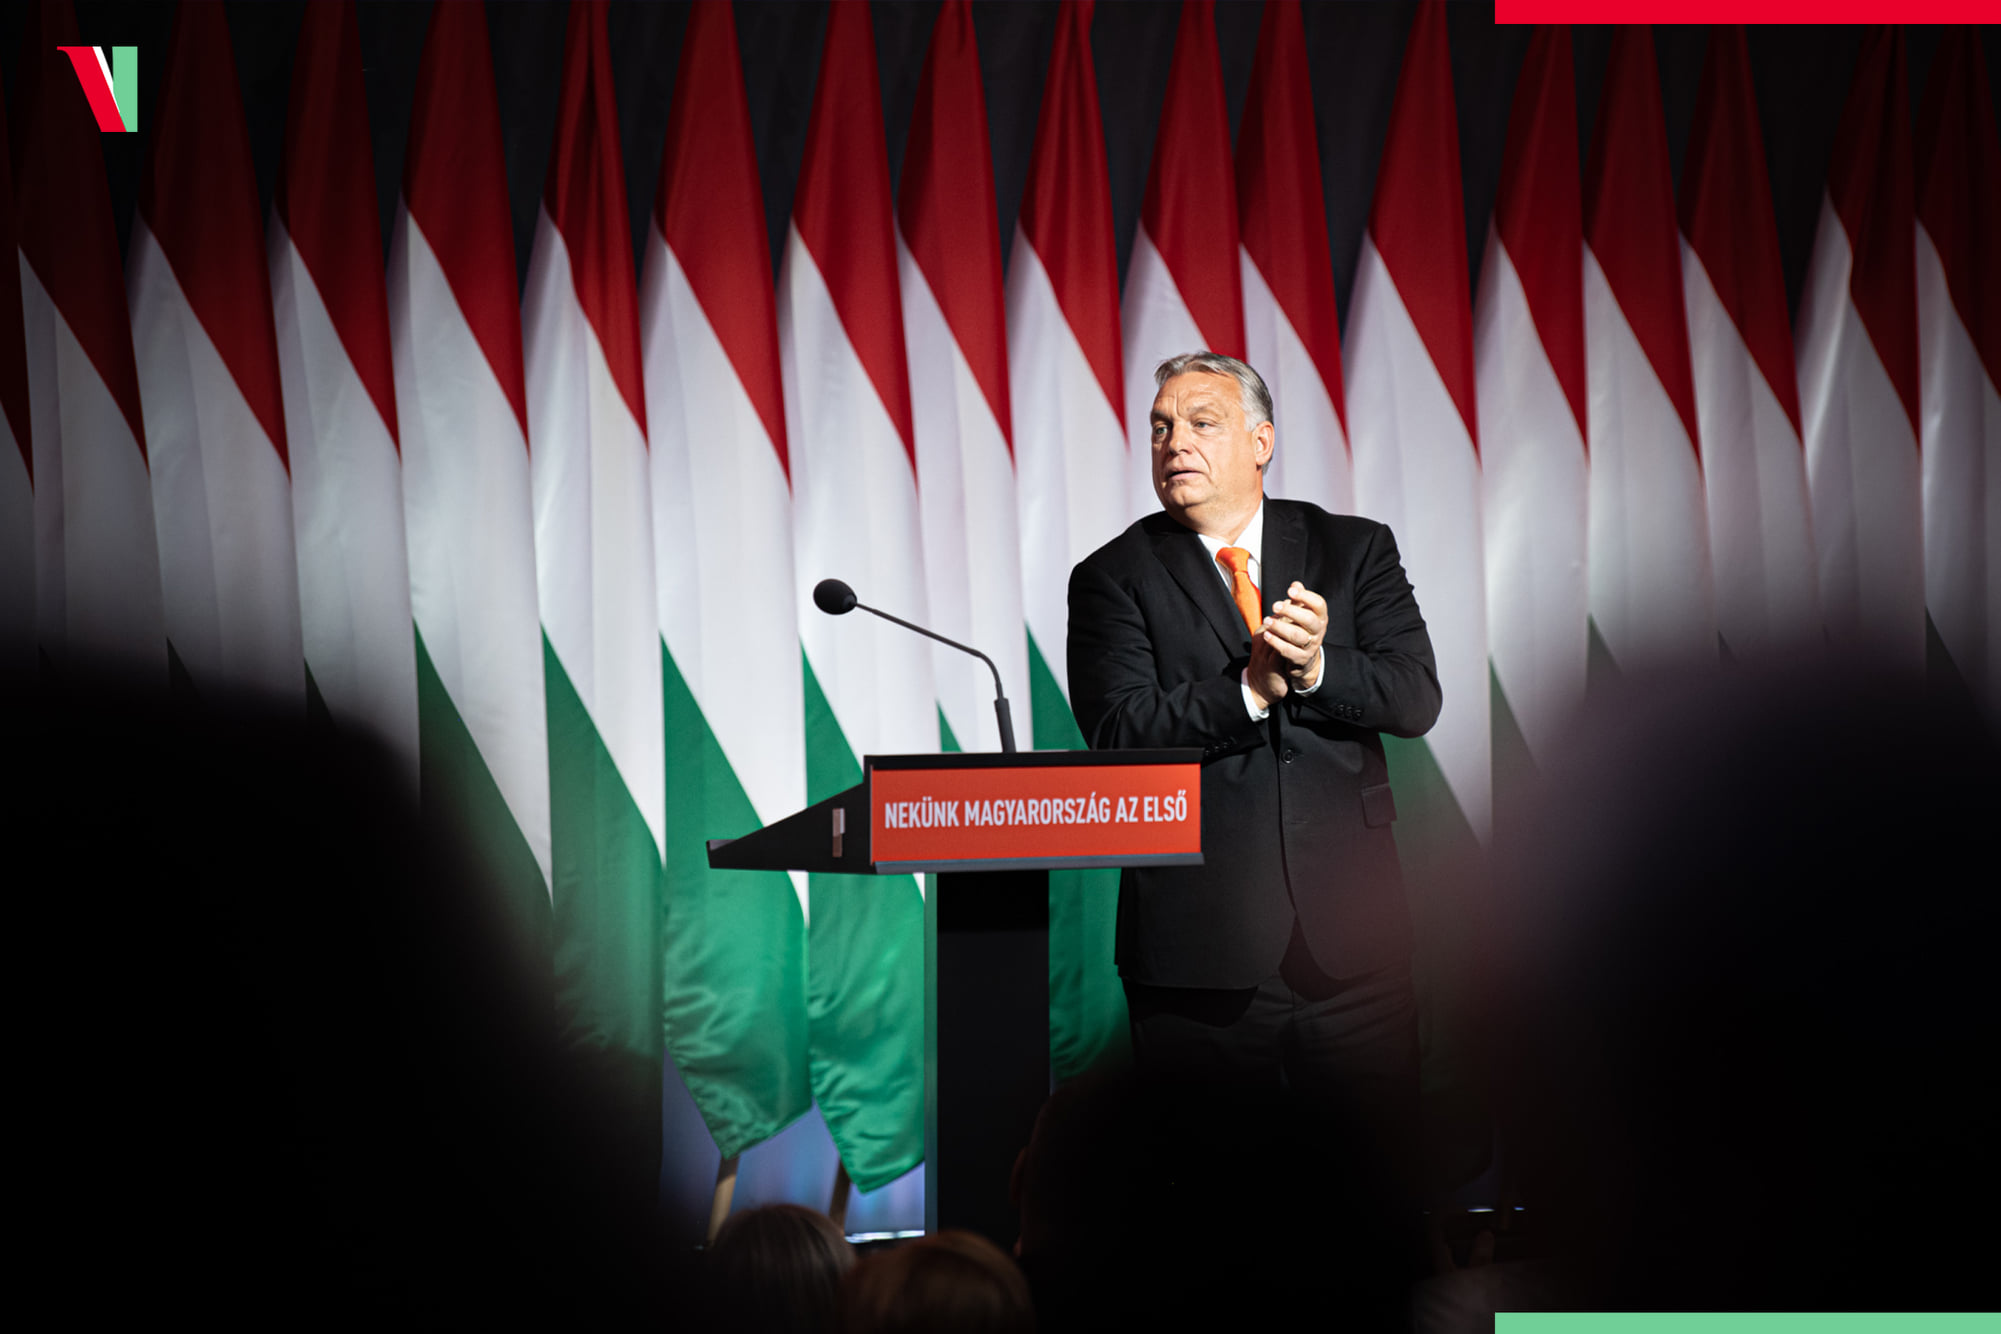 Press Roundup: Orbán Re-Elected Chairman of Fidesz